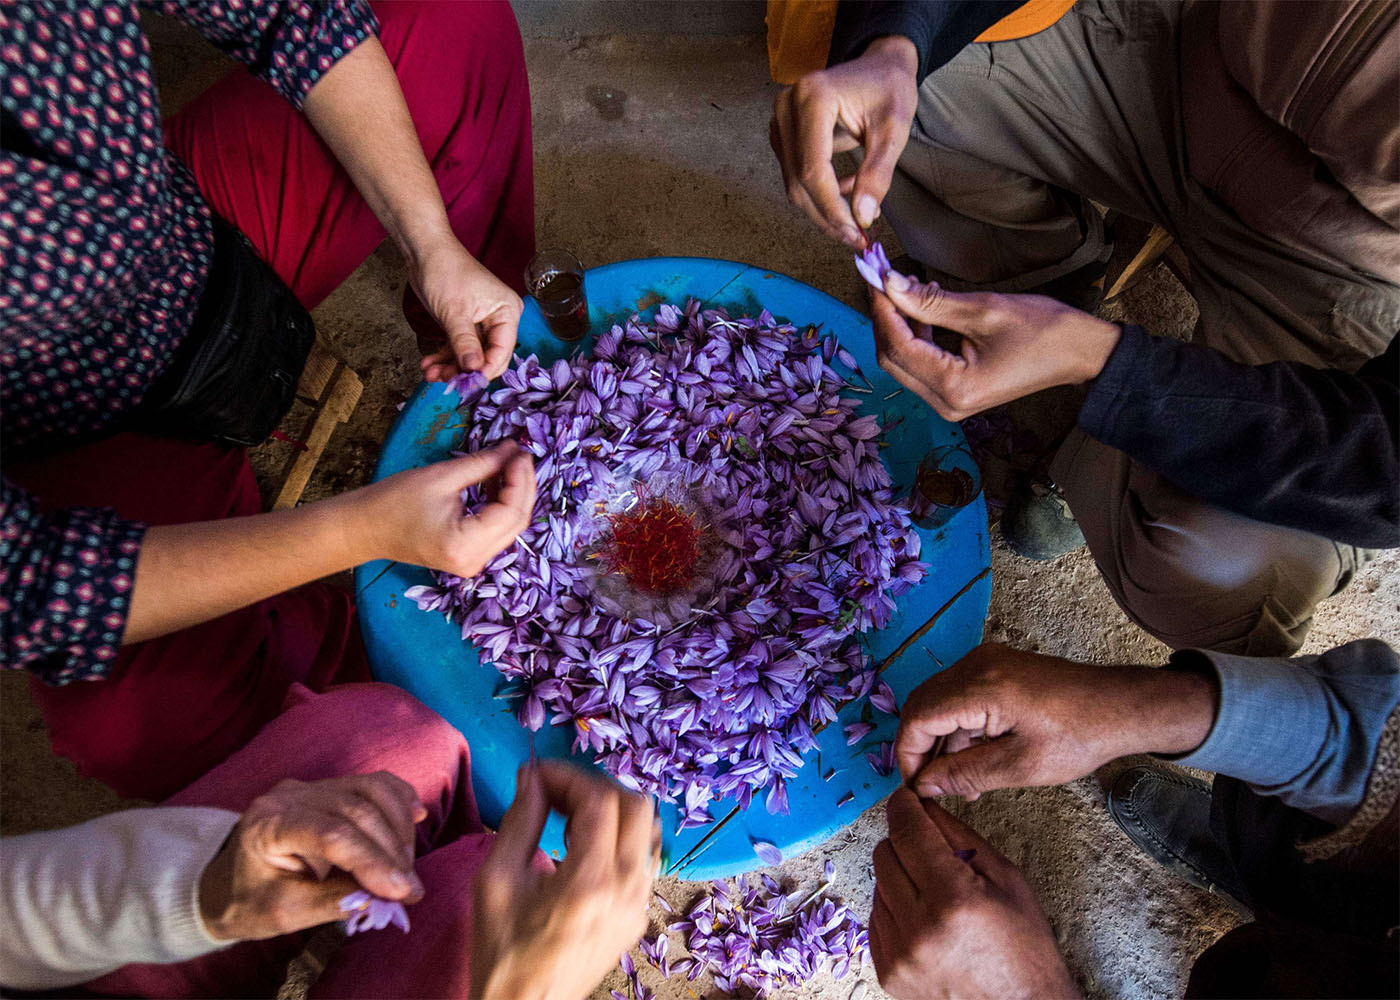 Workers sort and clean saffron flowers during its processing in the Taliouine region 